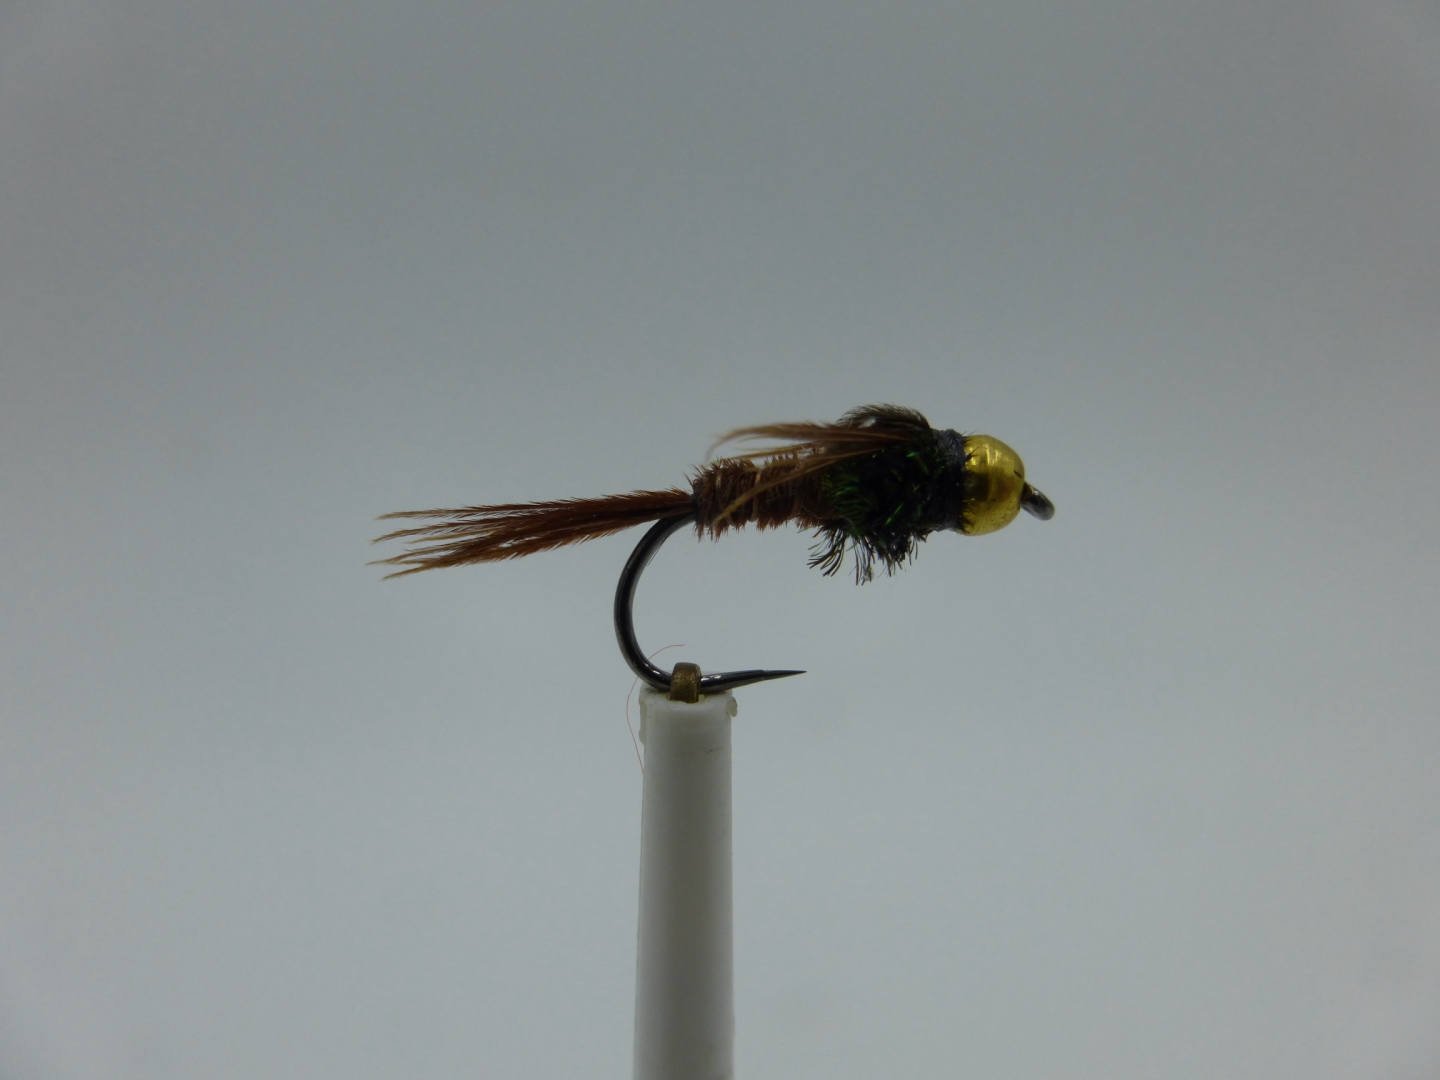 Size 12 Pheasant Tail Peacock Bead Head Barbless